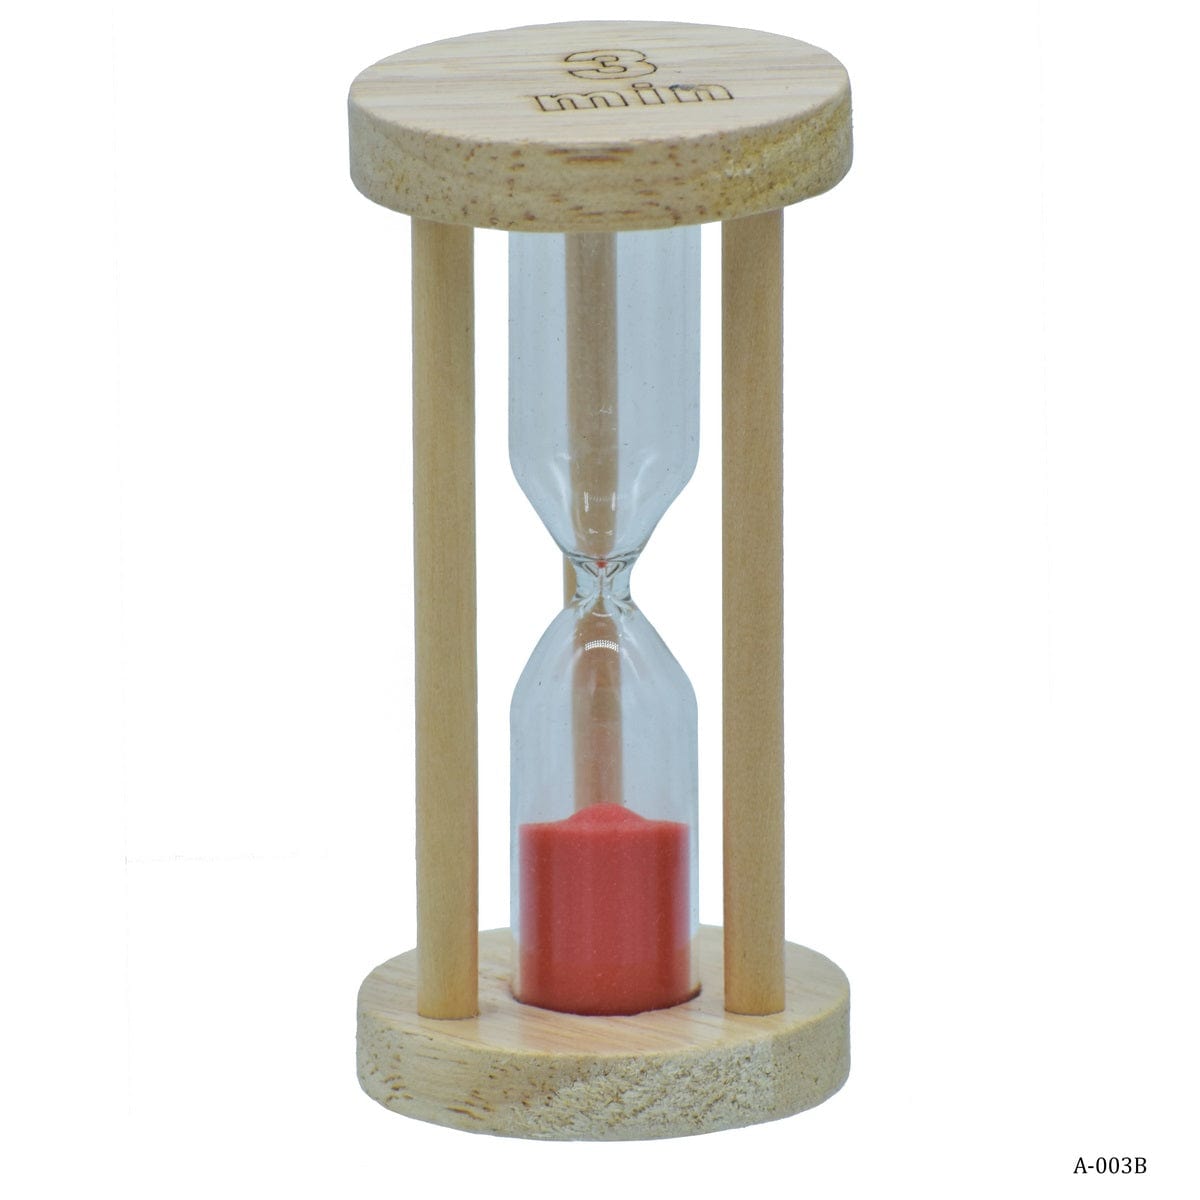 jags-mumbai Sand & Clock Timers Sand Timer Wooden Round Model 3 Minutes